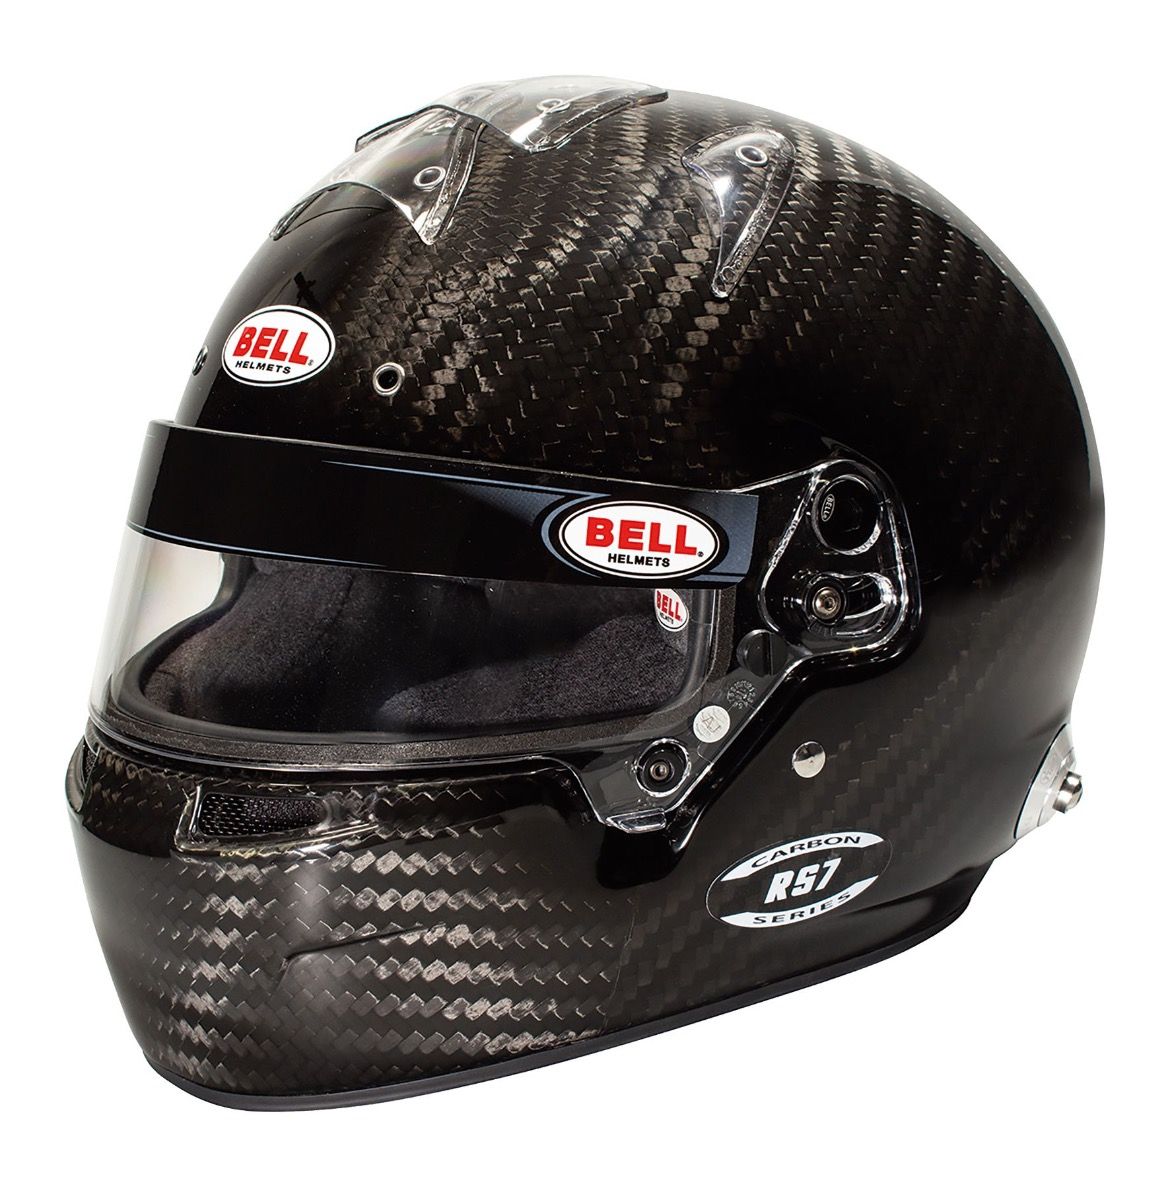 BELL | RS7 Carbon | Racing Helmet | Semi-PRO Level | Snell SA2020 & FIA 8859 DRIVEN | Performance Products